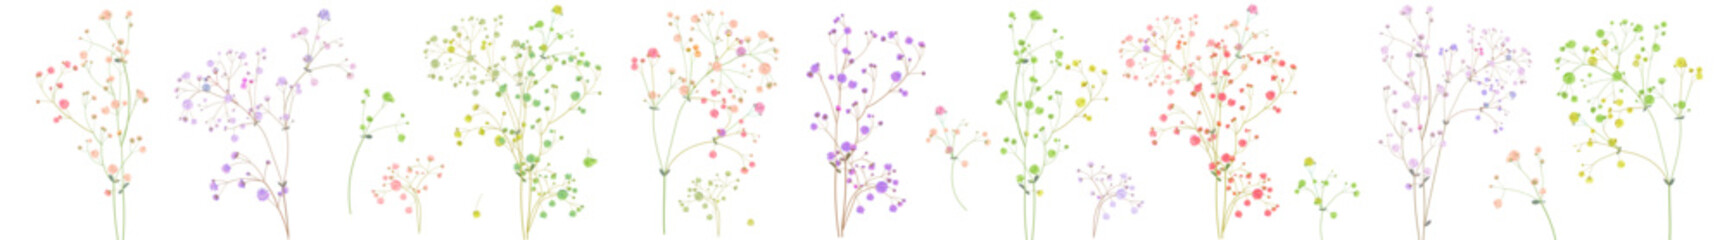 Panoramic horizontal pattern with delicate twigs of gypsophile. Pink, white, blue, green tiny little flowers, small leaves. Branches for bouquets. Botanical illustration in watercolor style, vector